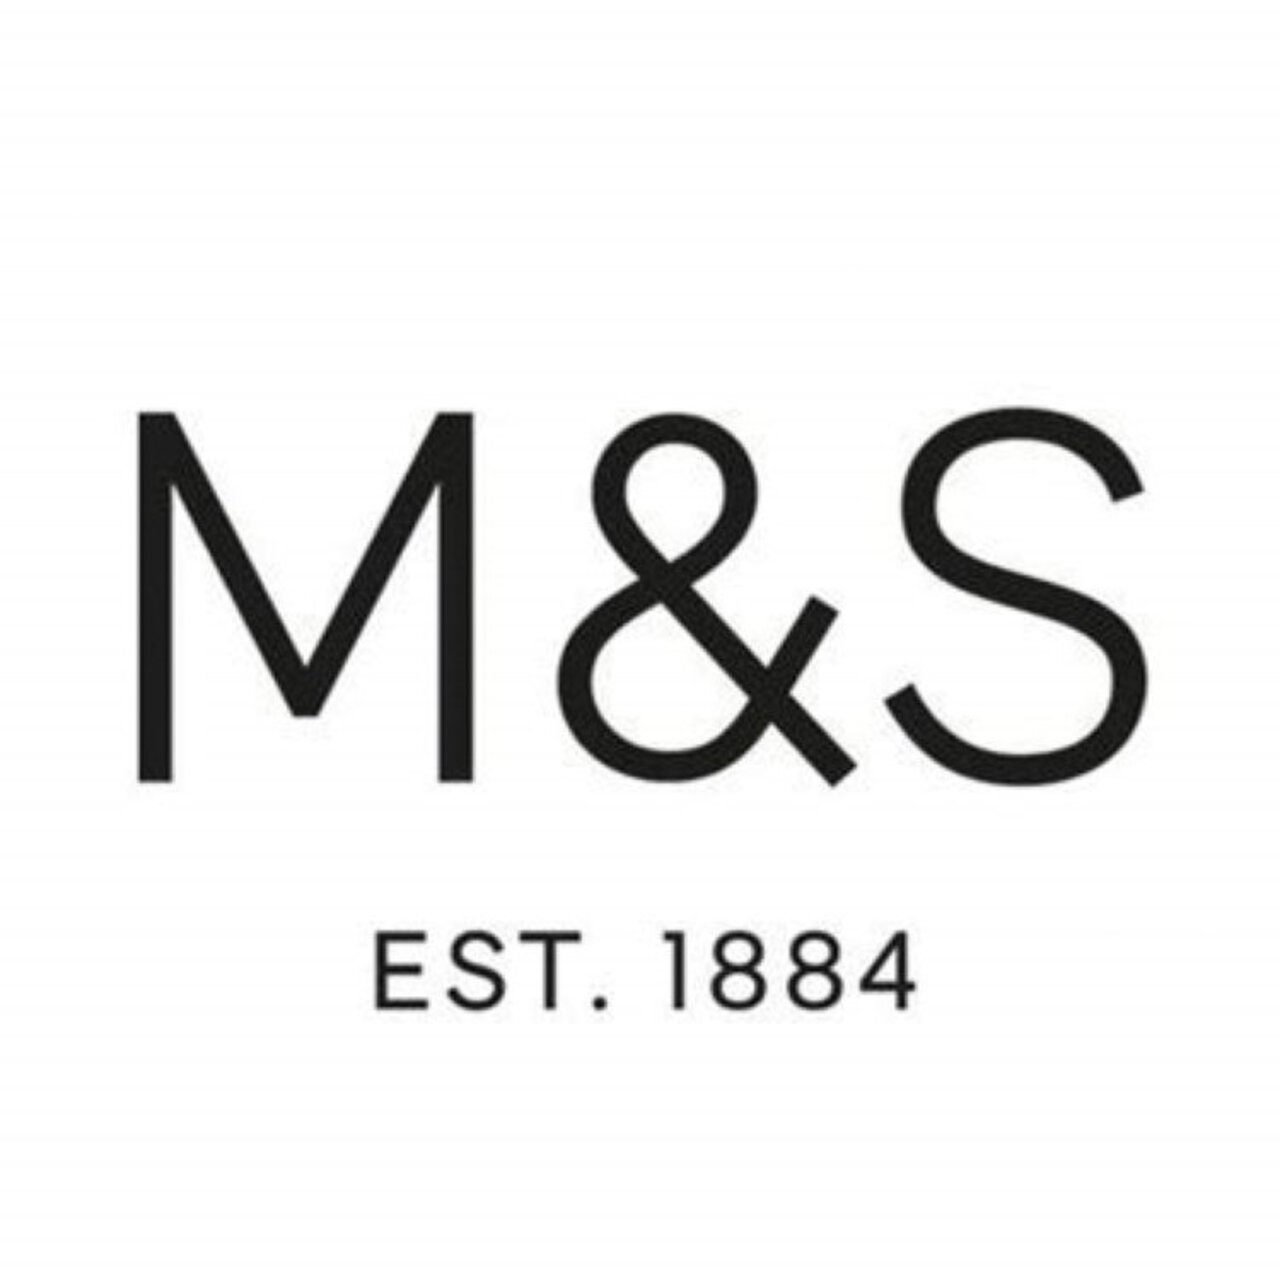 M&S 4 All Butter Pain Aux Chocolat 4 per pack